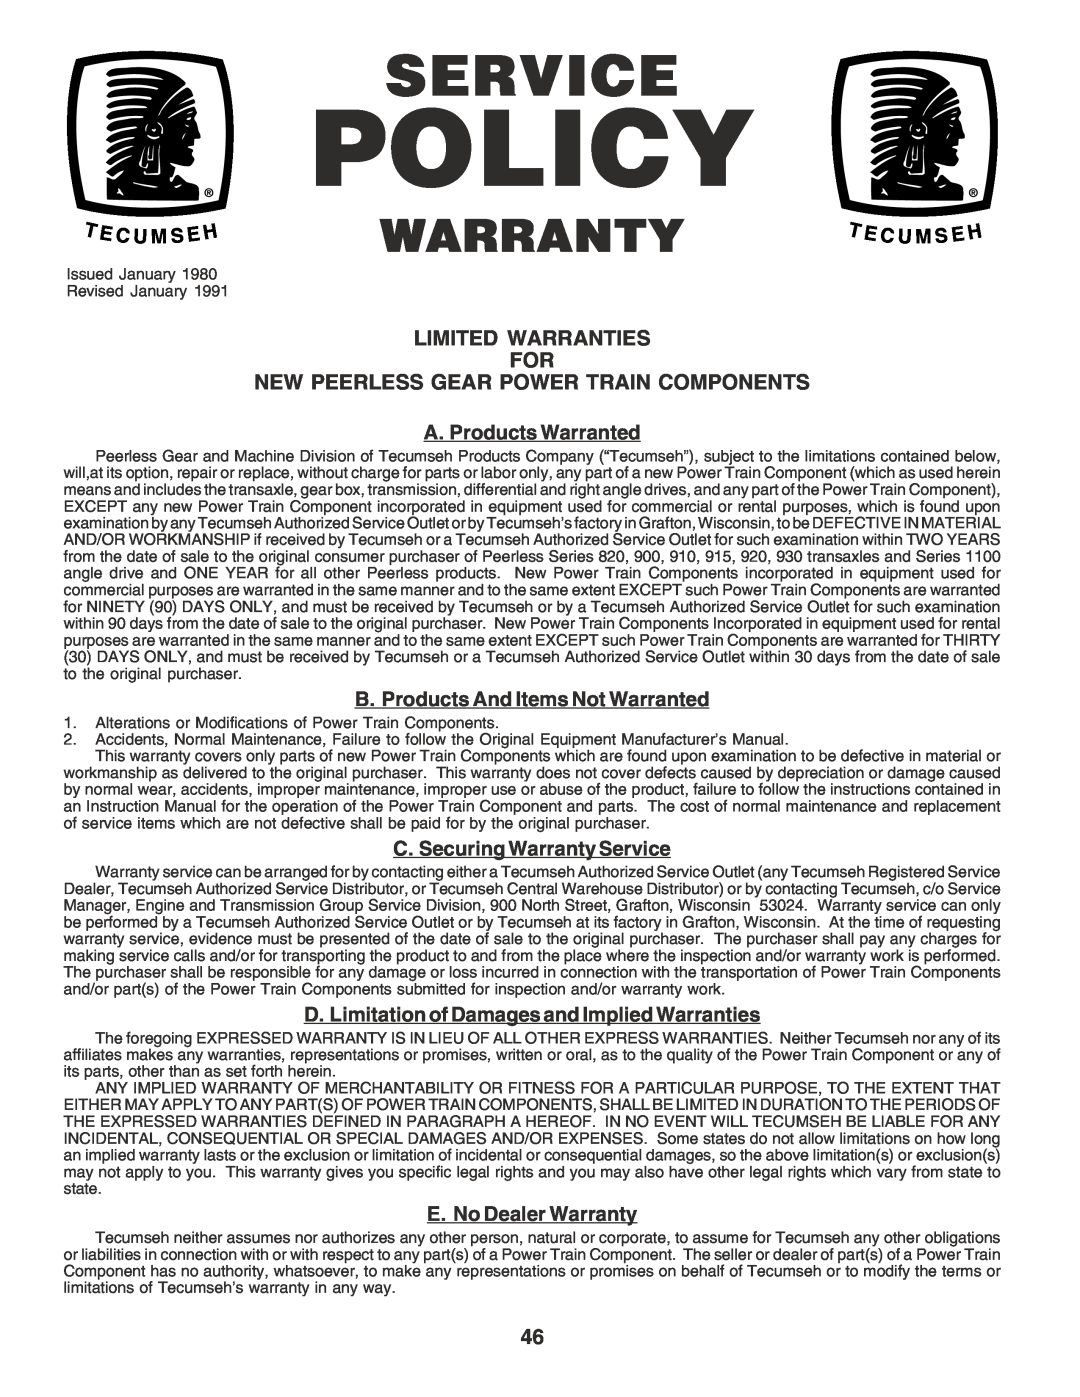 Poulan PR1742STF owner manual Limited Warranties For, New Peerless Gear Power Train Components, Policy, T E C U M Seh 